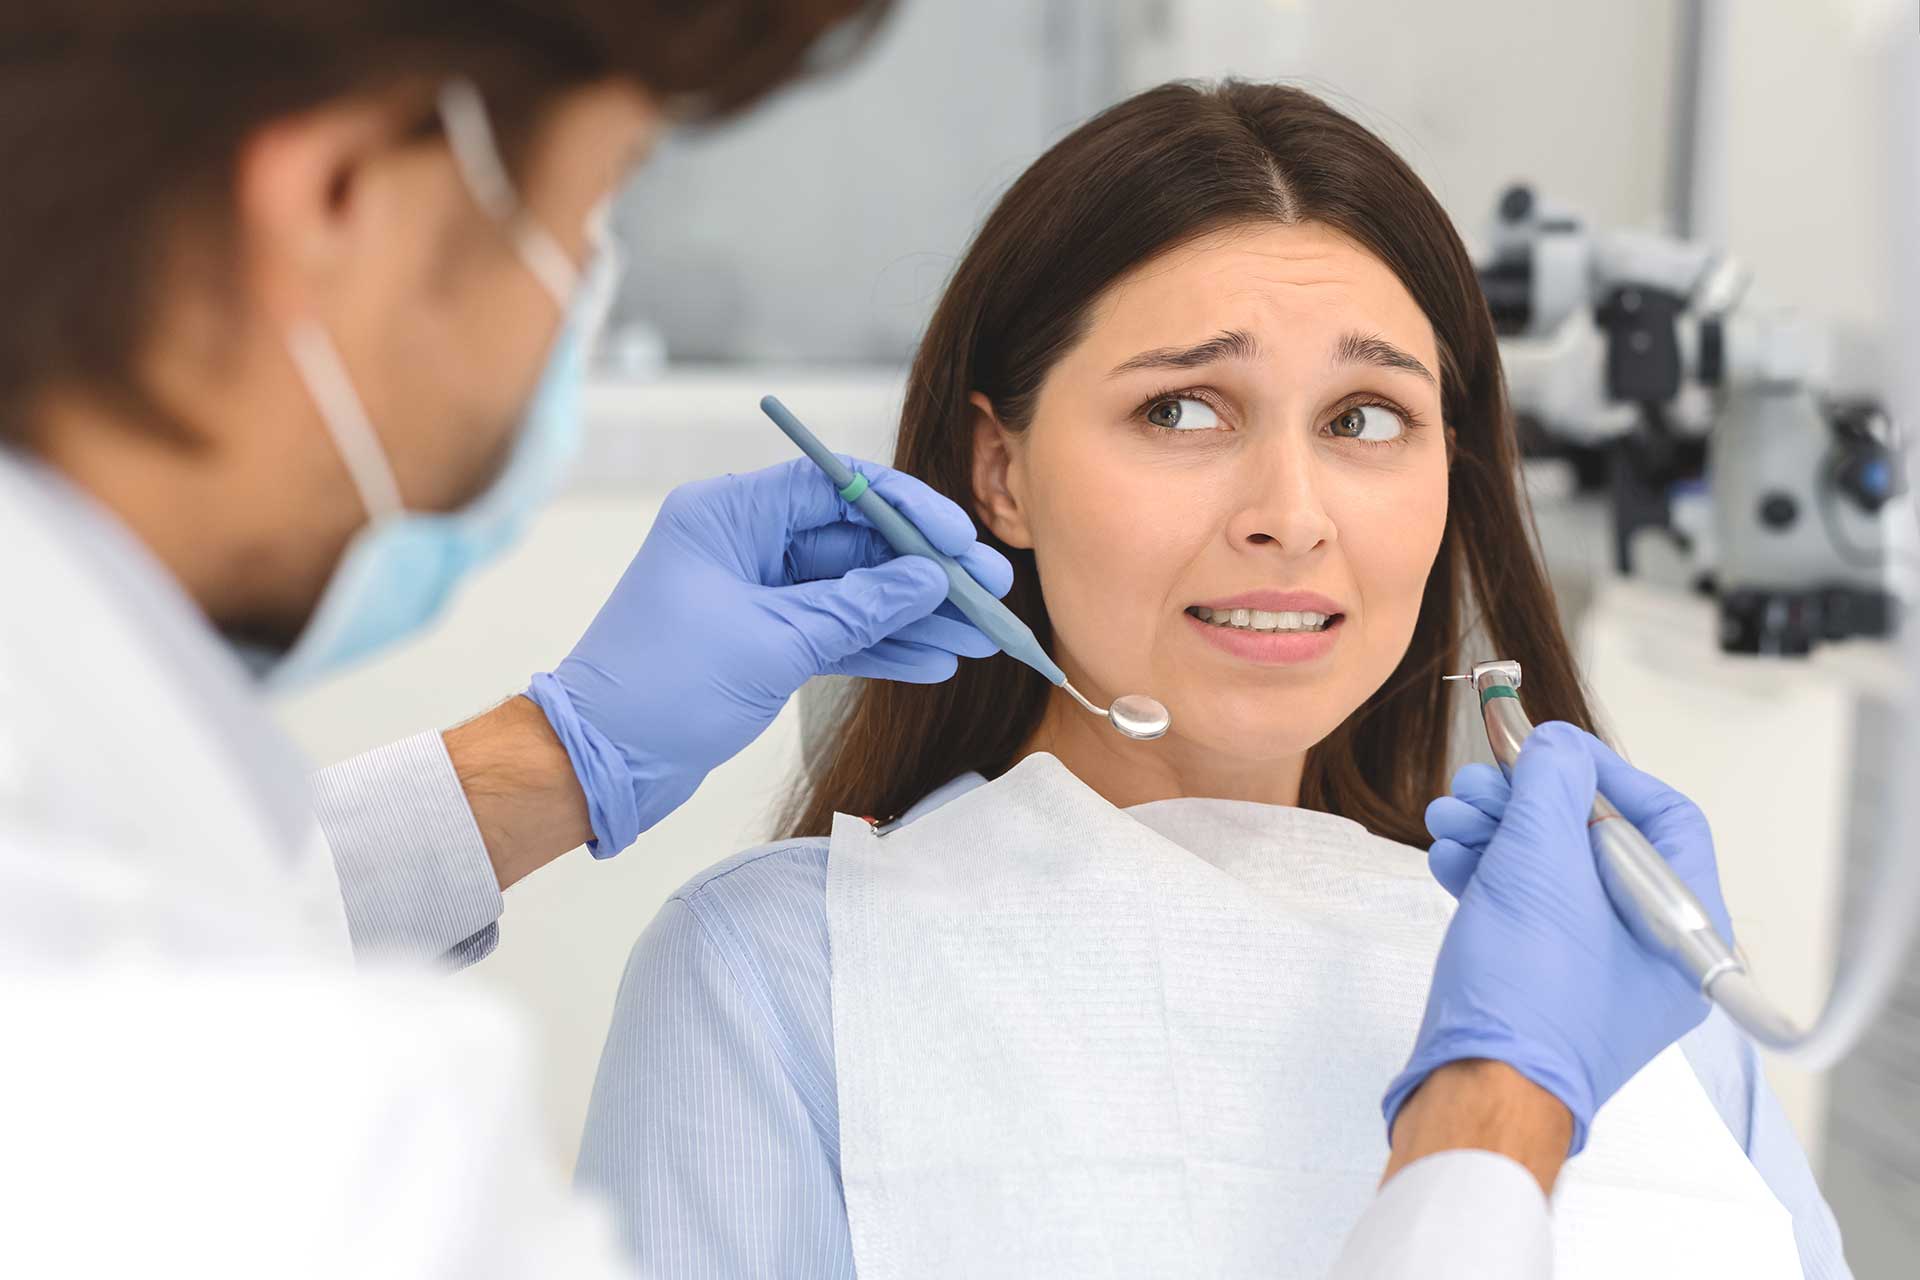 Overcoming Fear of Going to the Dentist